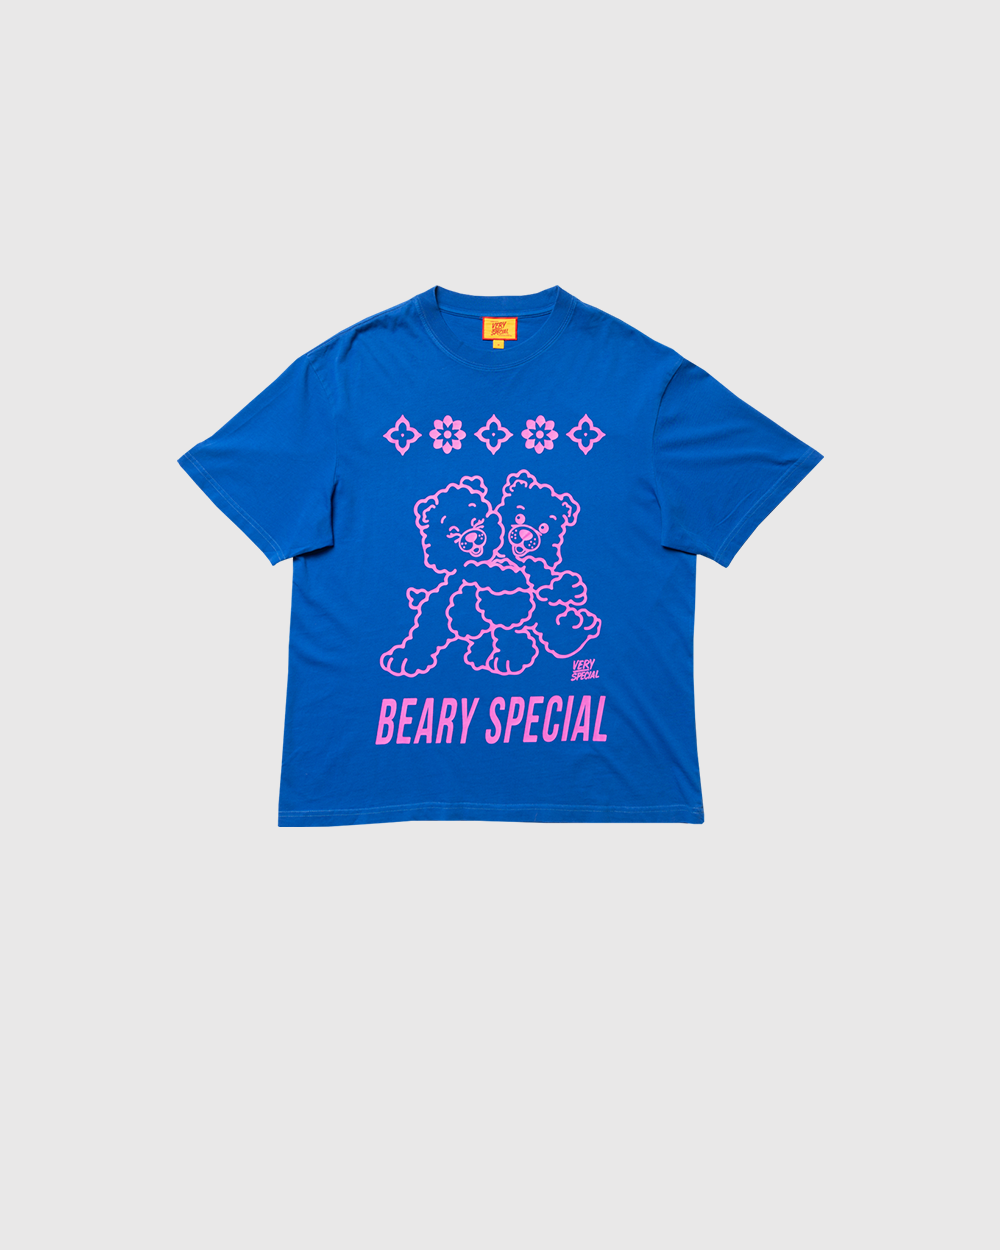 Blue Beary Special tee